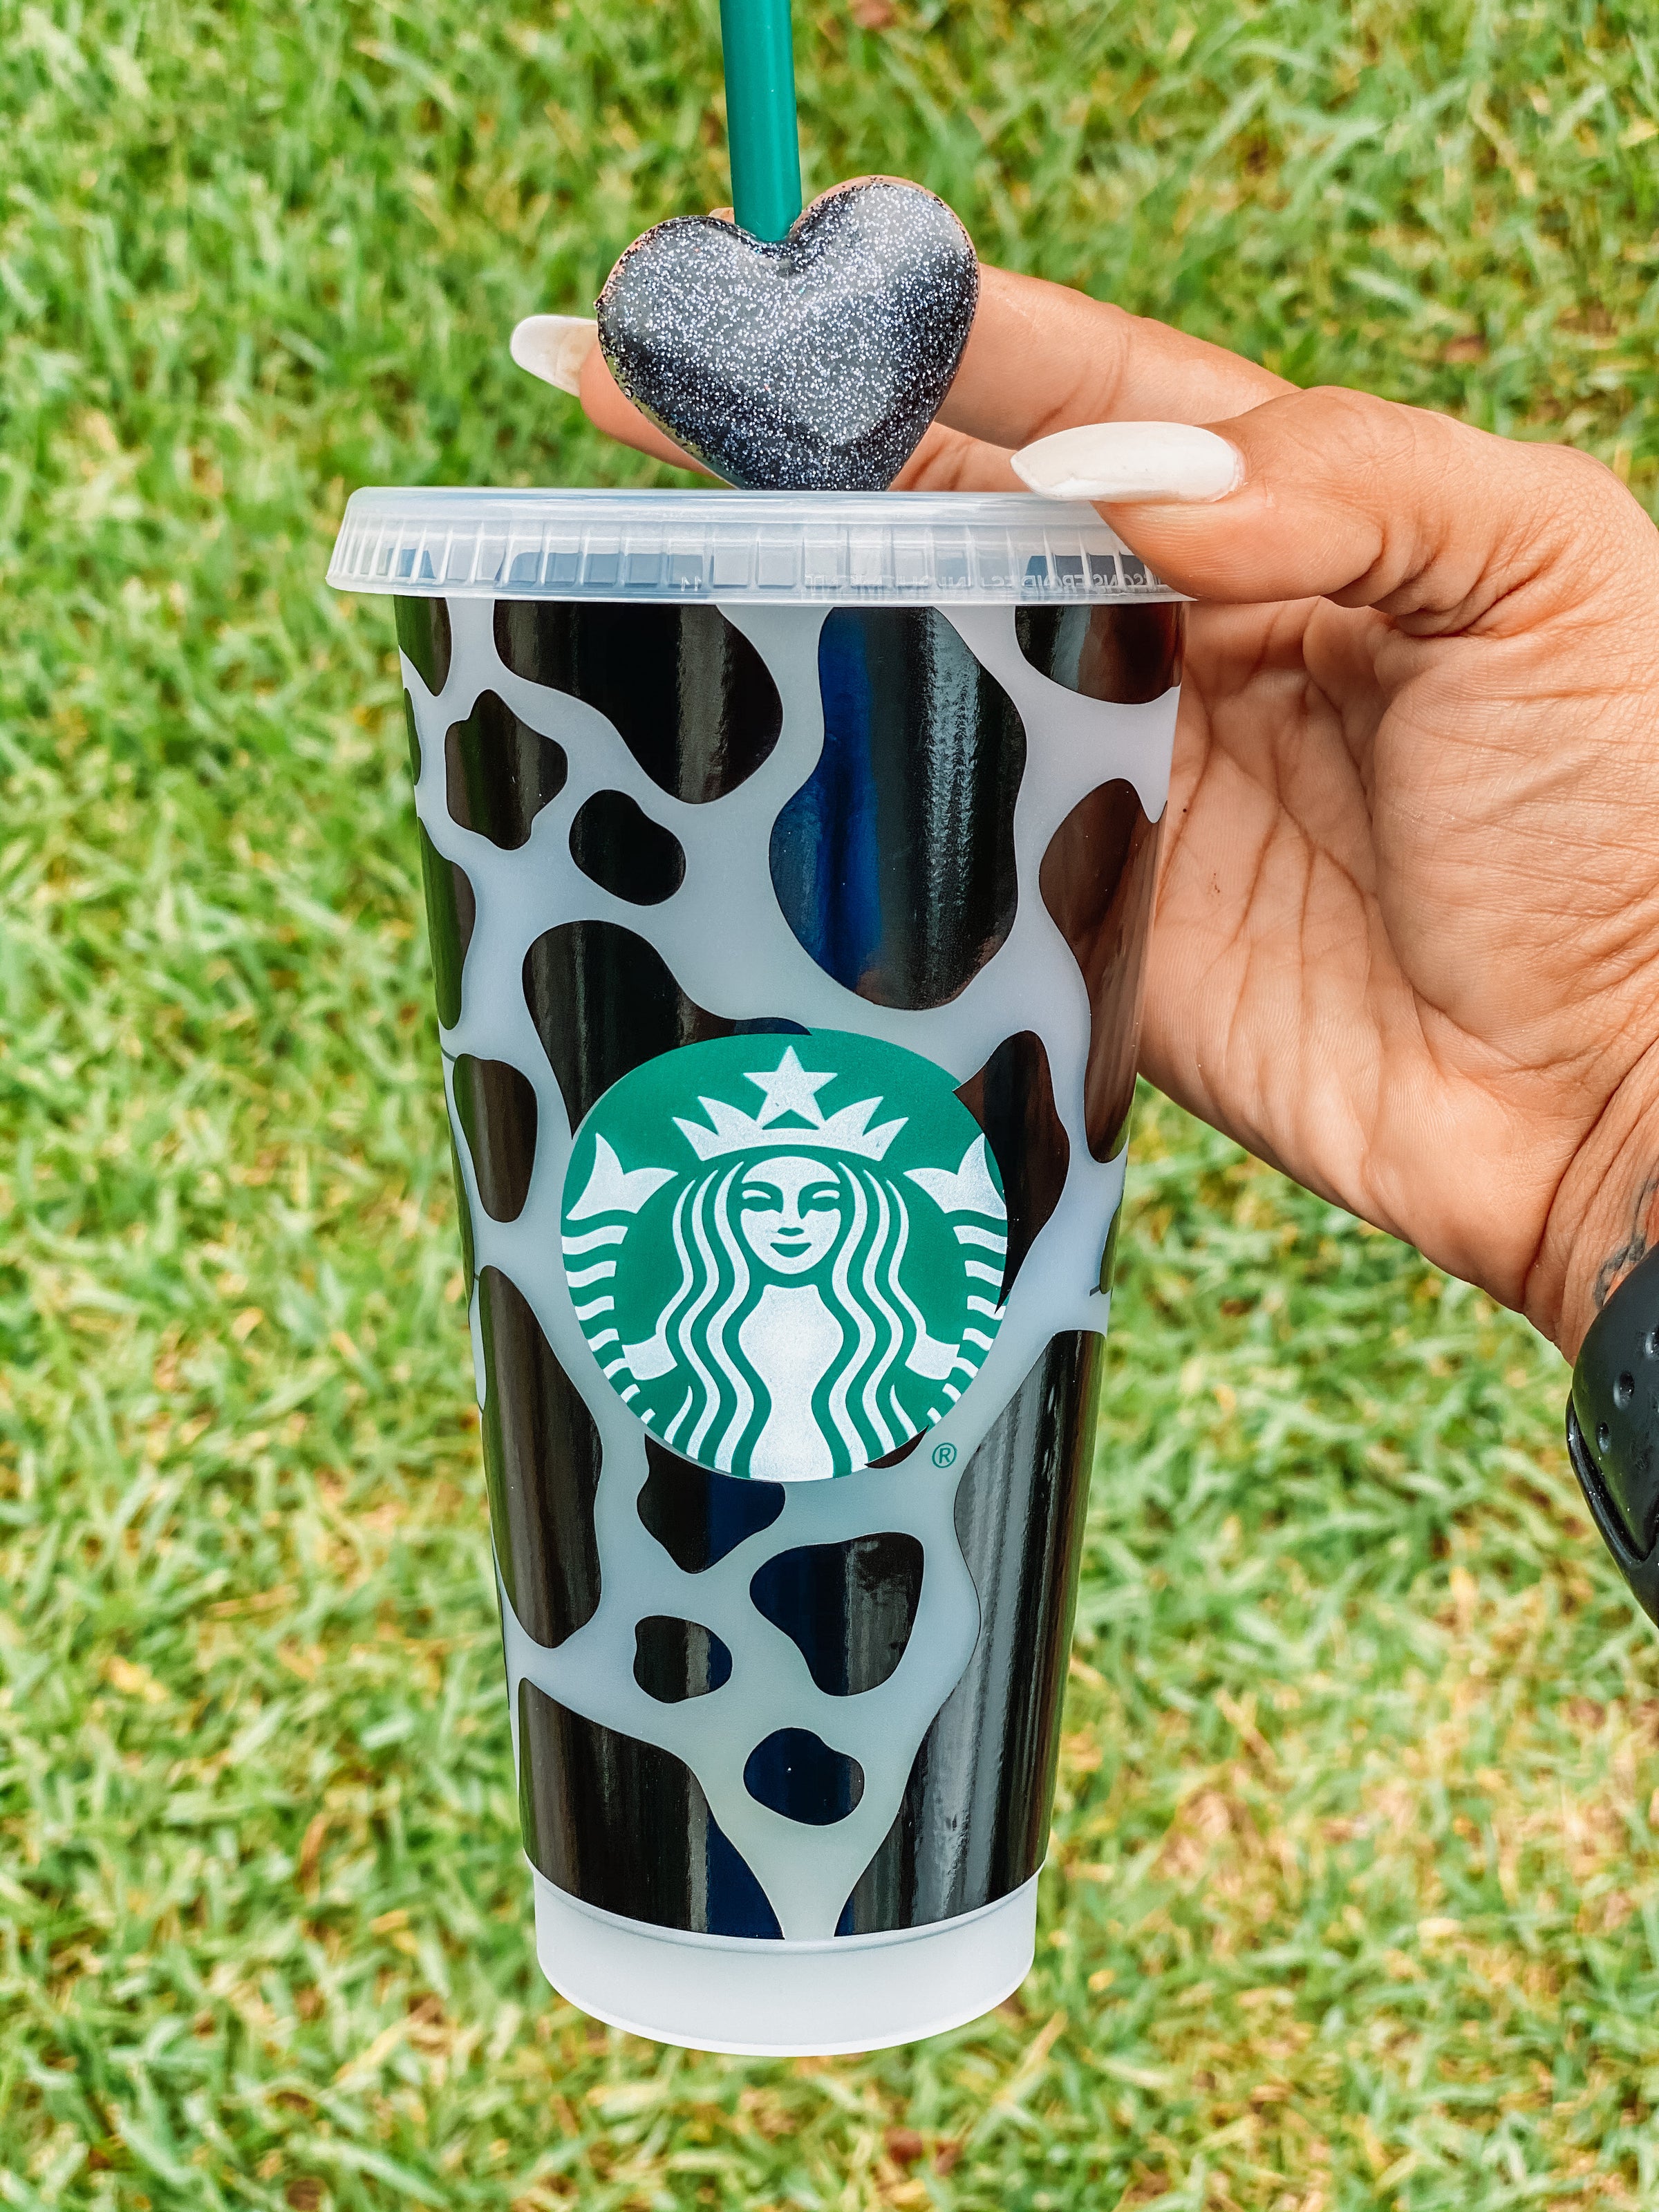 Starbucks Reusable Venti Cup | Cow Print | Personalized Cup with Name |  Gift for Best Friend | Sister Gift | Birthday Gift | Starbucks 